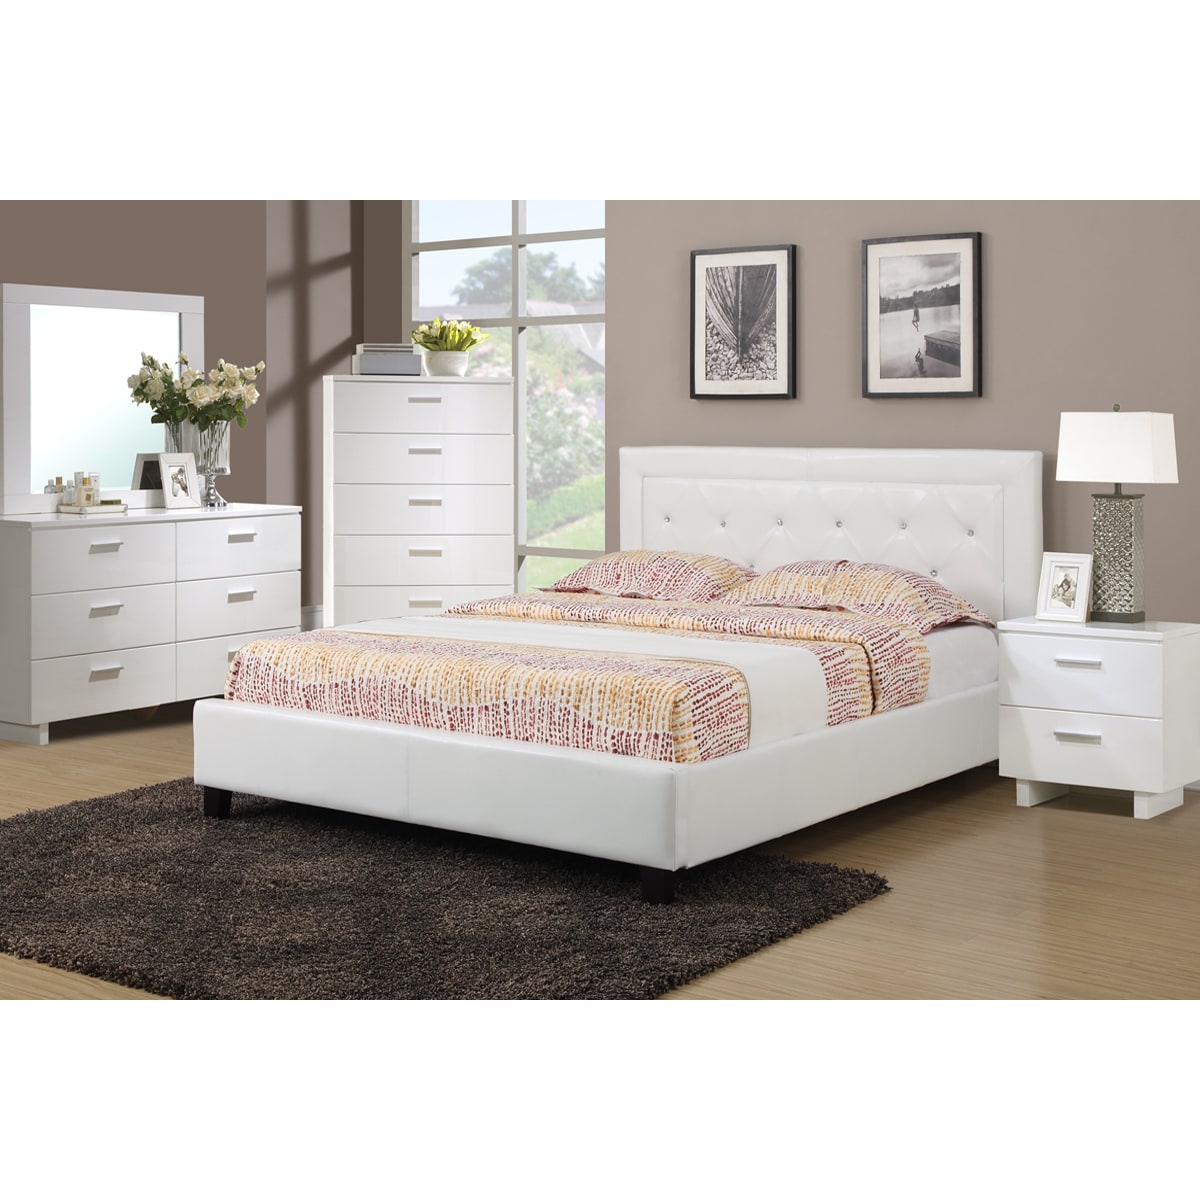 Shop Podolinec 4 Piece Bedroom Set With Matching Nightstand